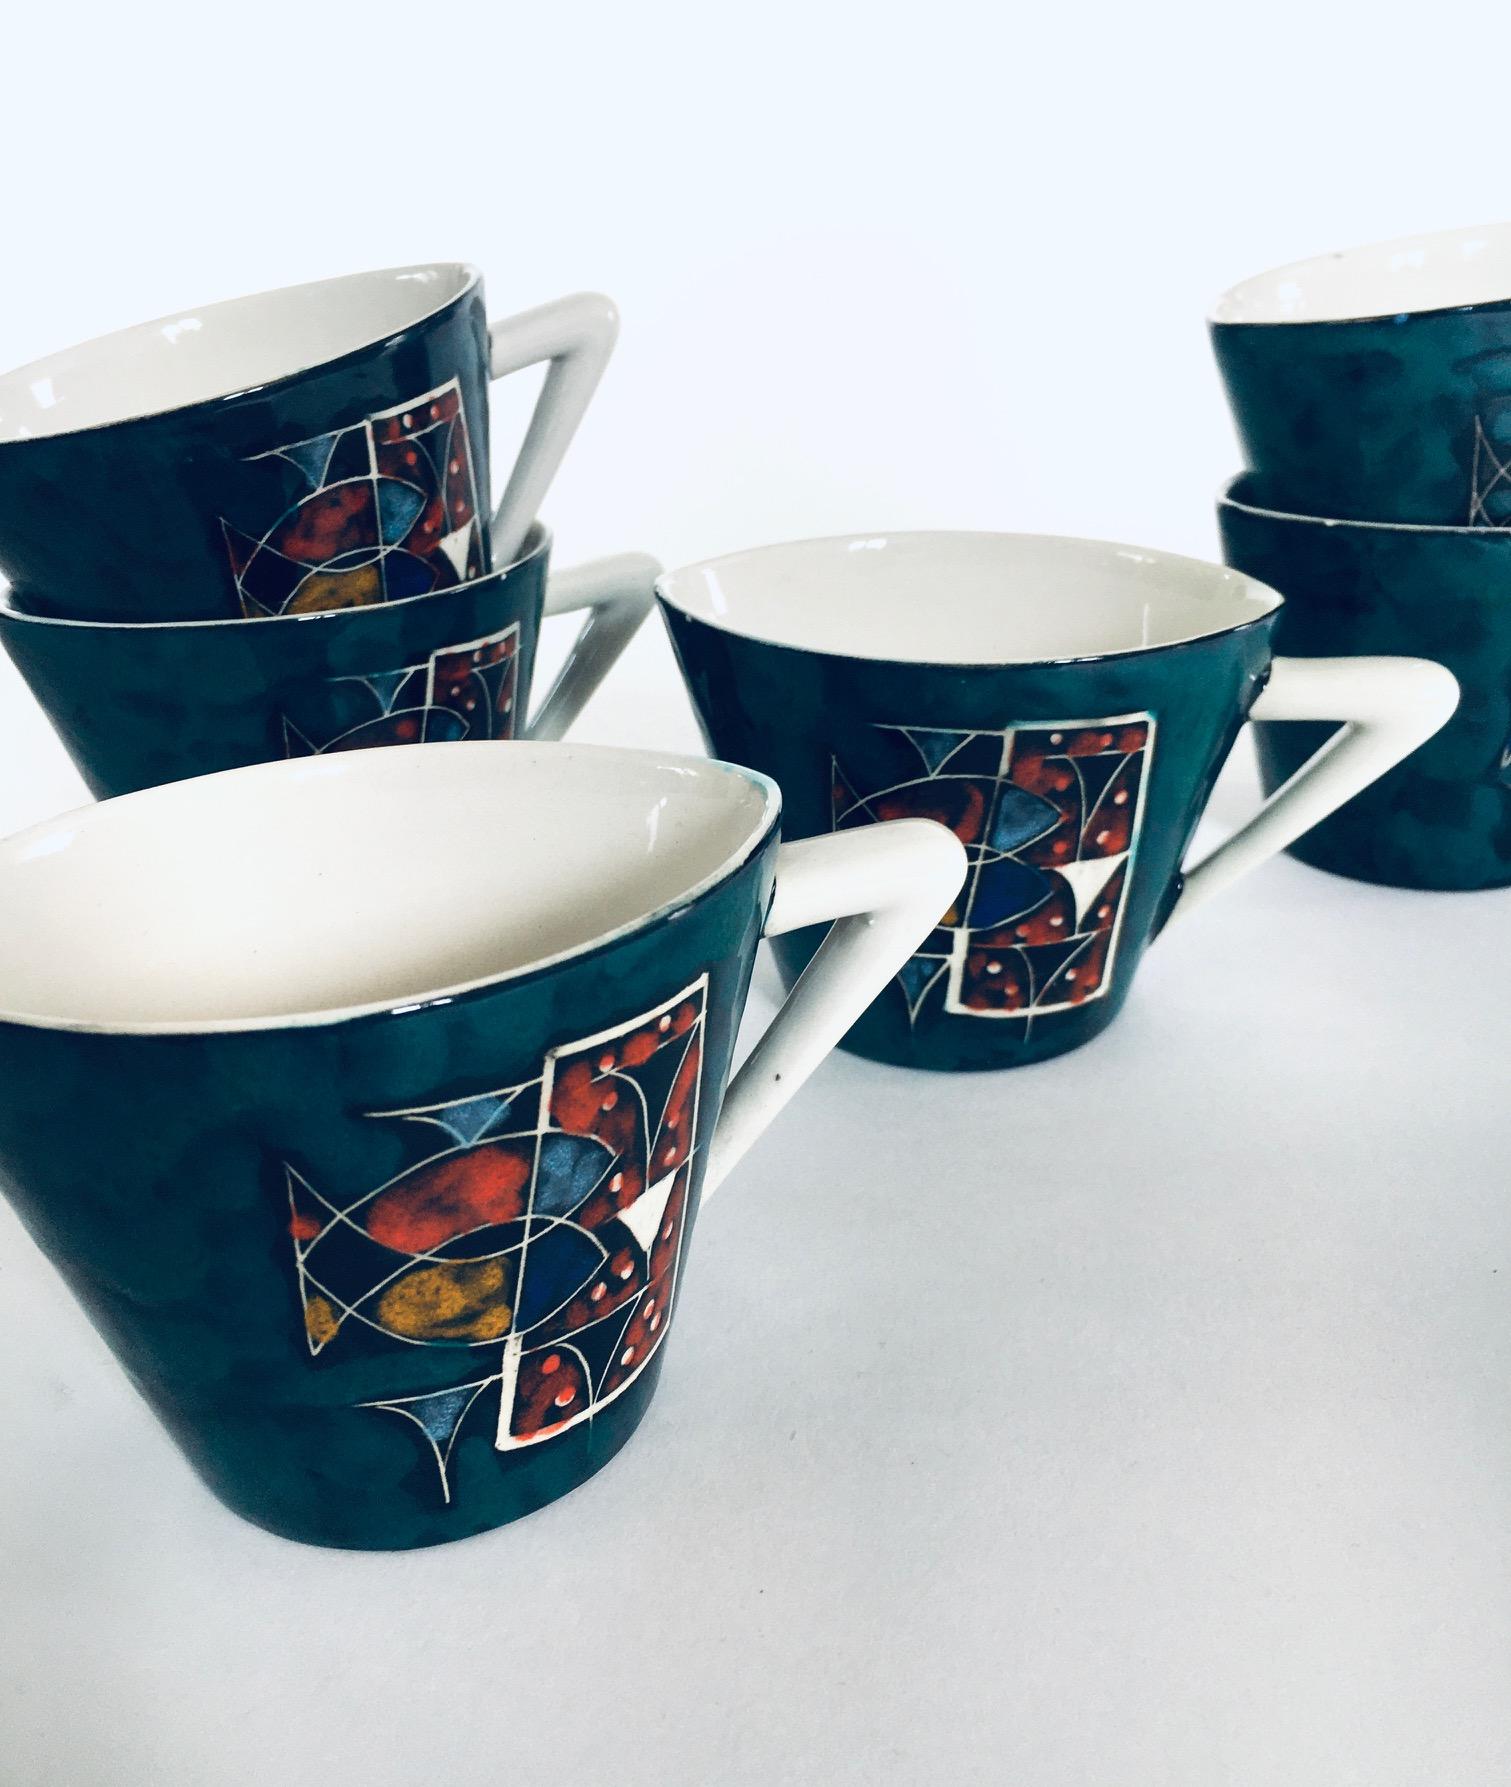 Midcentury Modern Art Ceramic Tea or Coffee Service Set by CEMAS, Italy 1950's For Sale 11